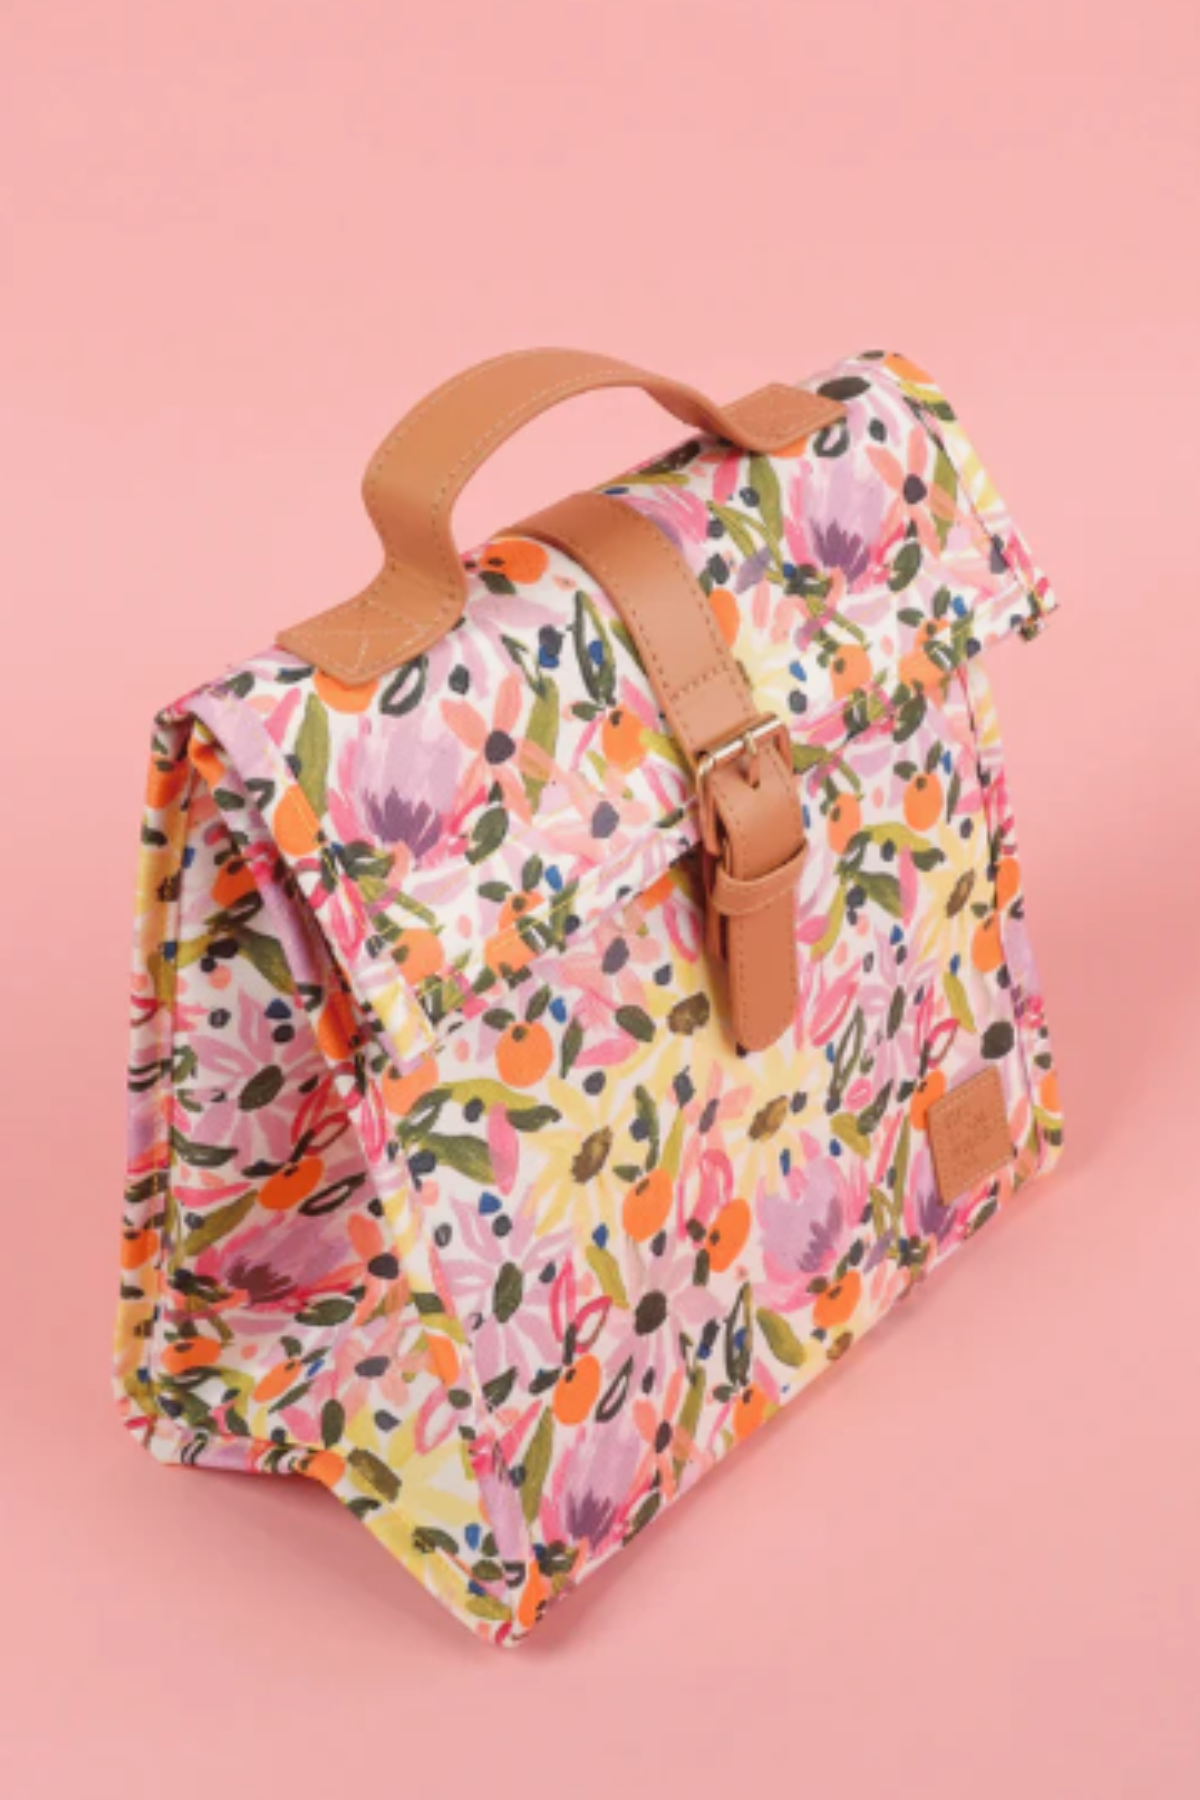 Wildflower Lunch Satchel by The Somewhere Co